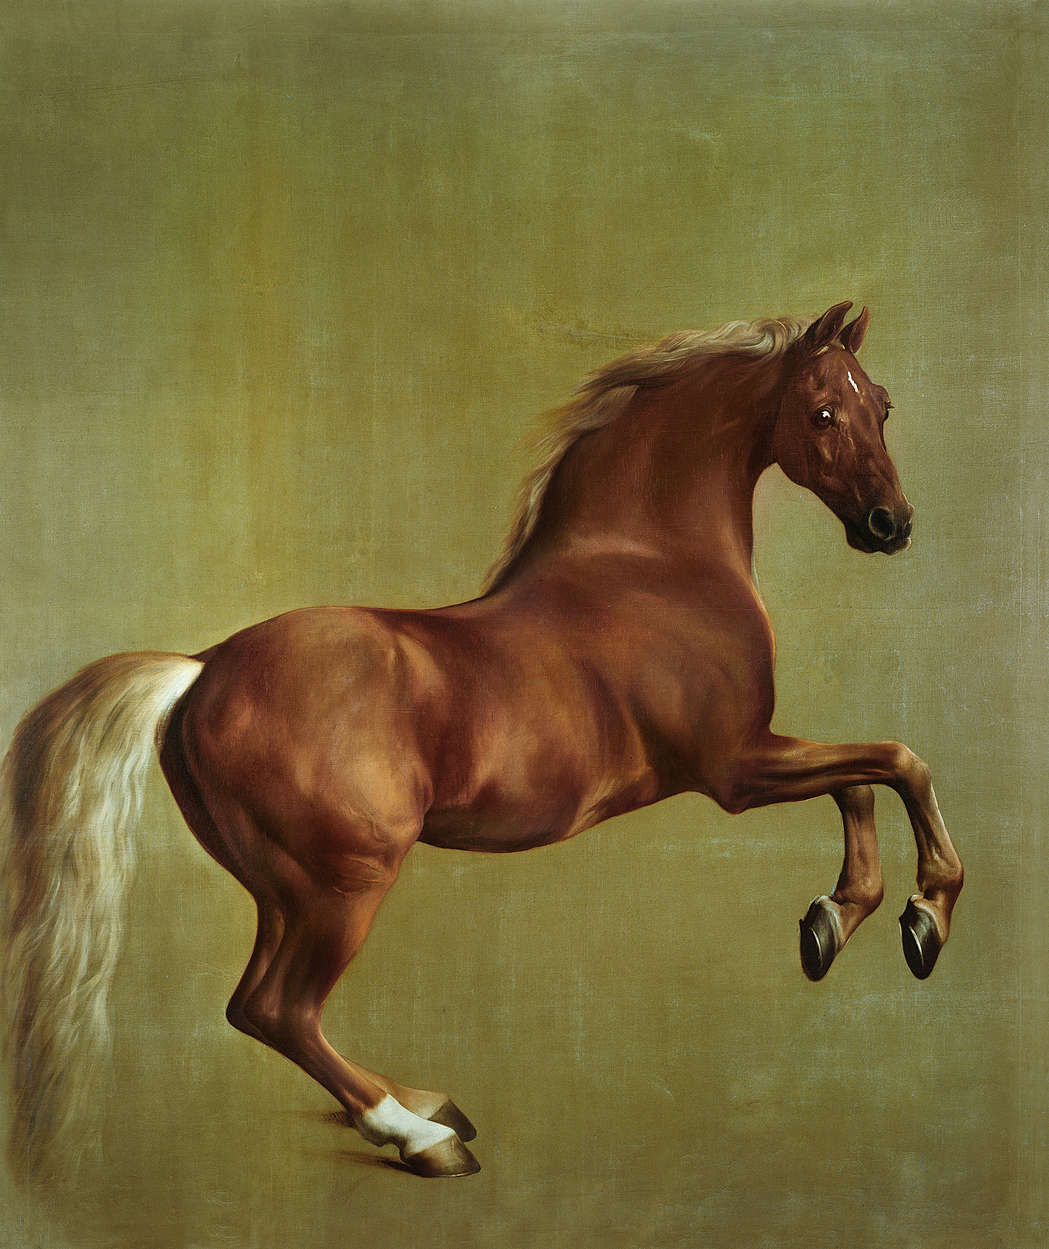             Photo wallpaper "Whistlejacket" by George Stubbs
        